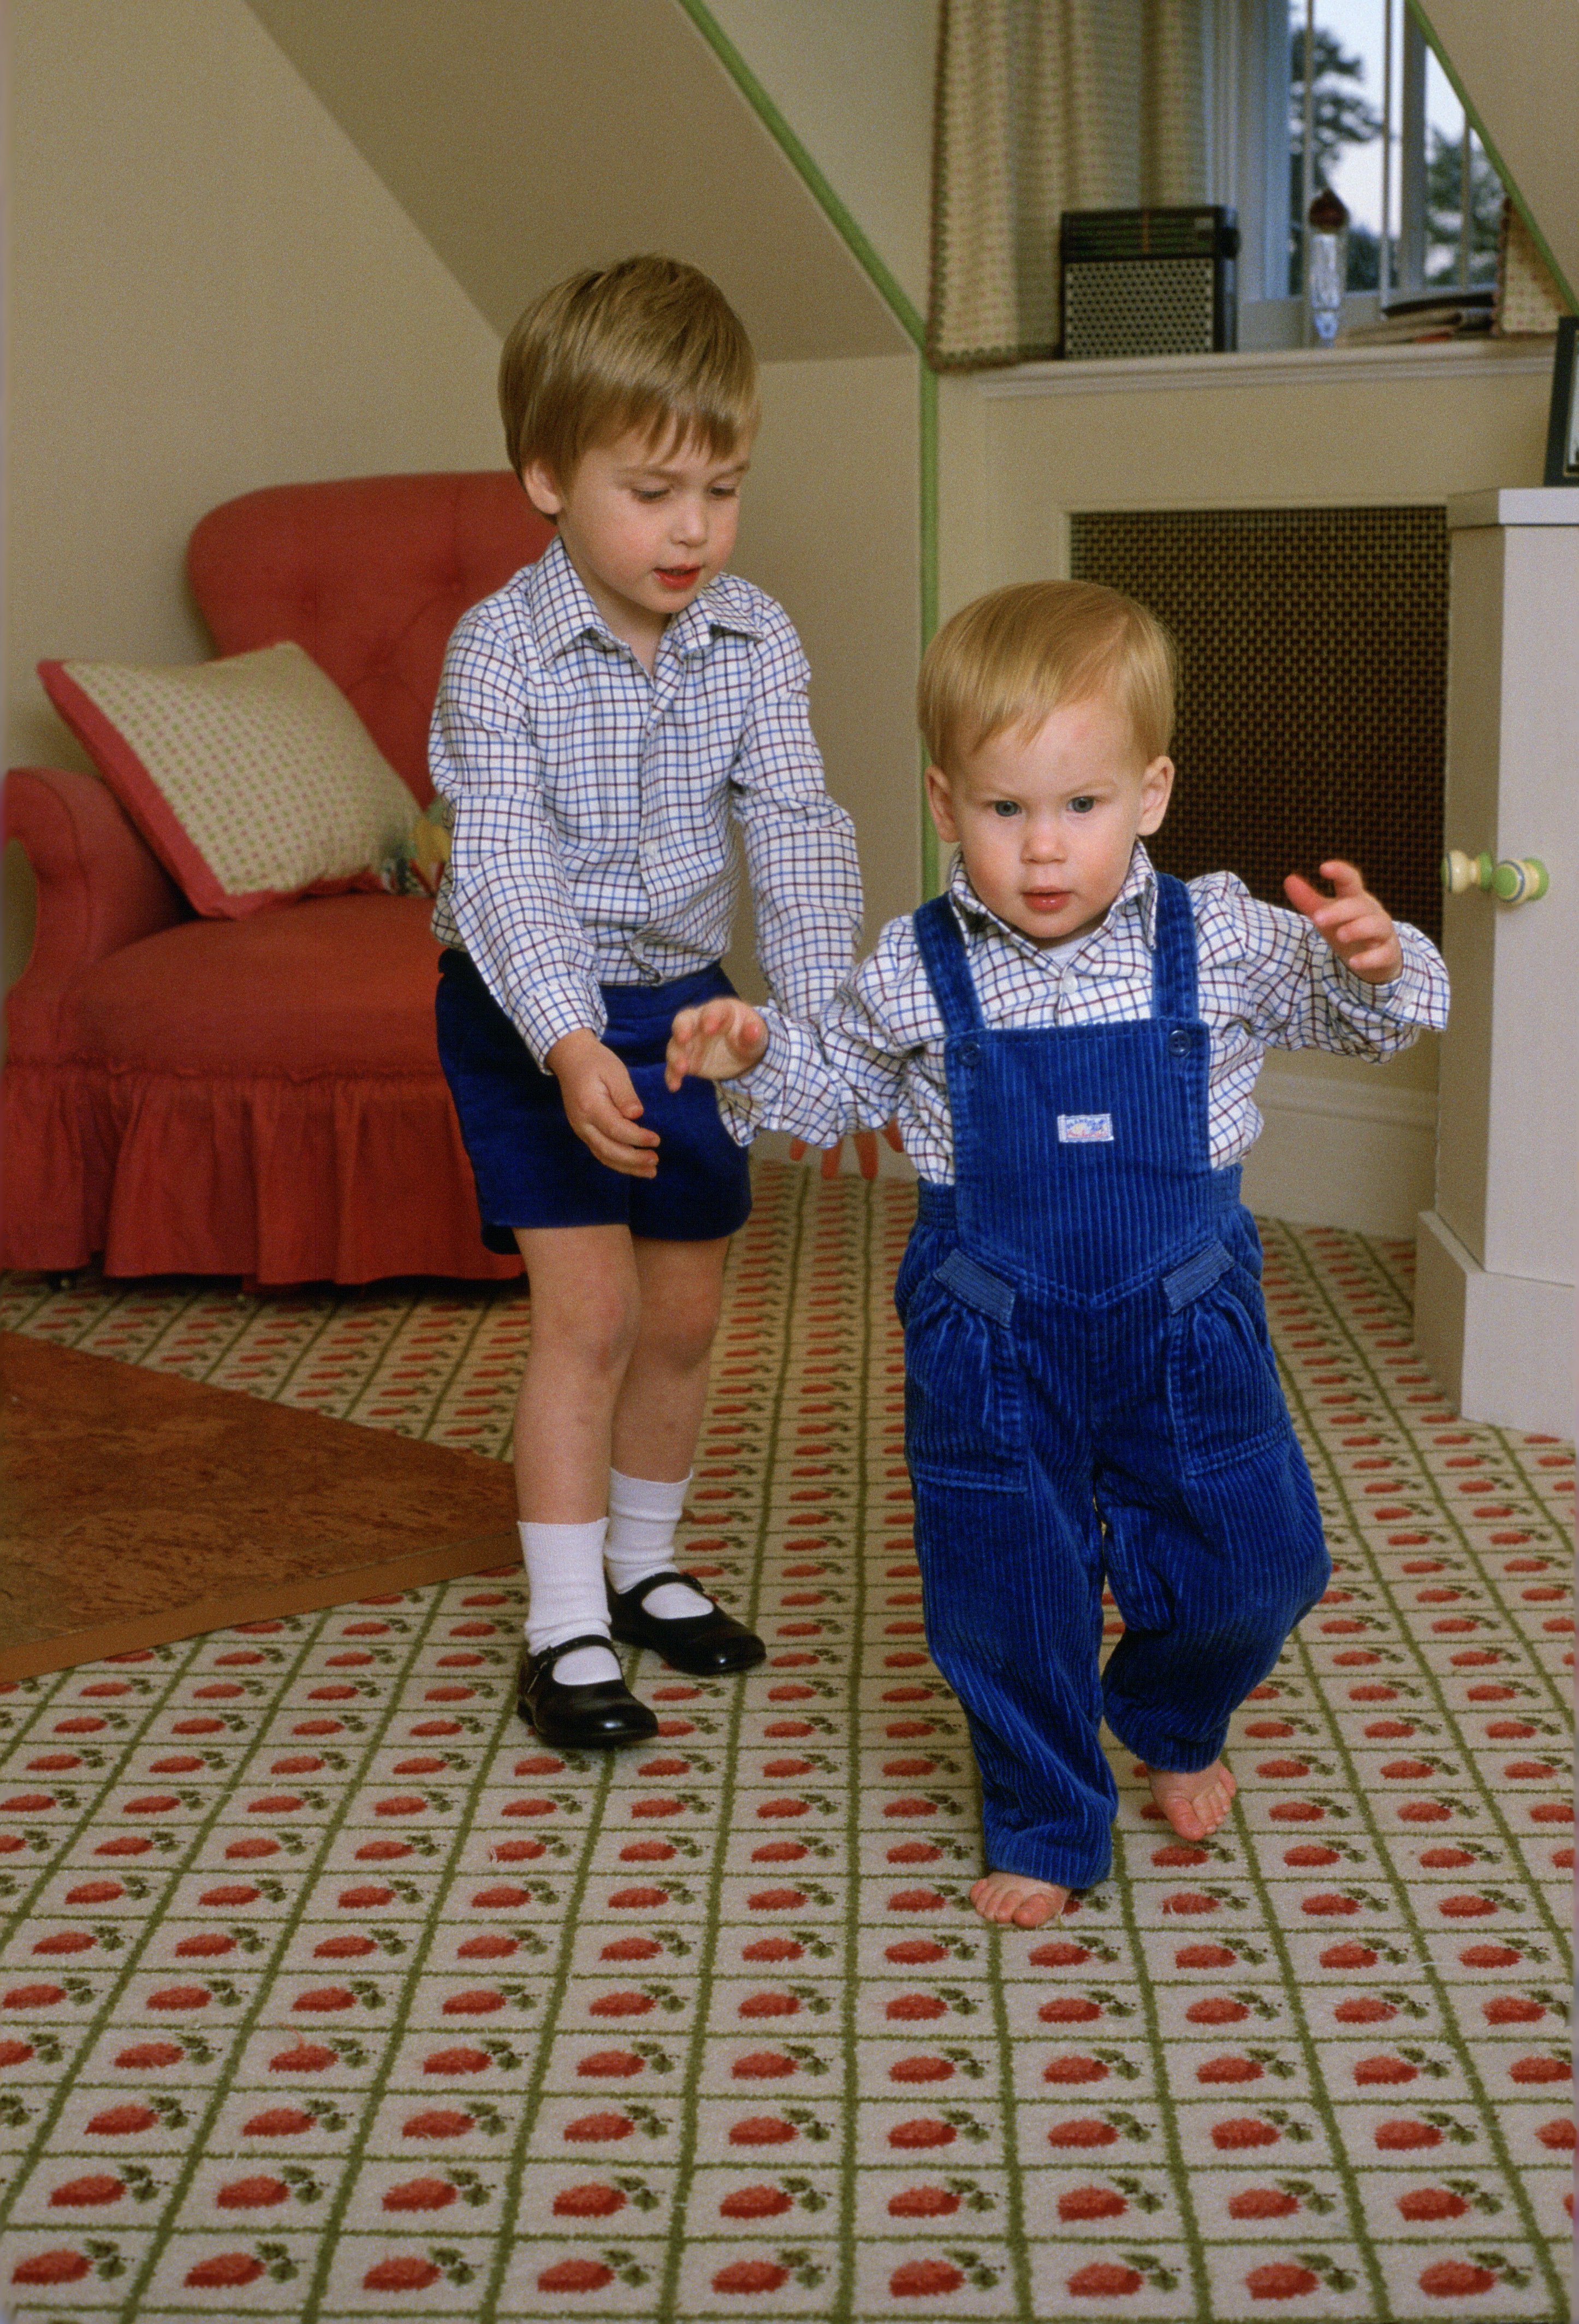 Prince William and Prince Harry as the latter tries to walk on his own in the playroom at Kensington Palace on October 22, 1985. | Source: Getty Images